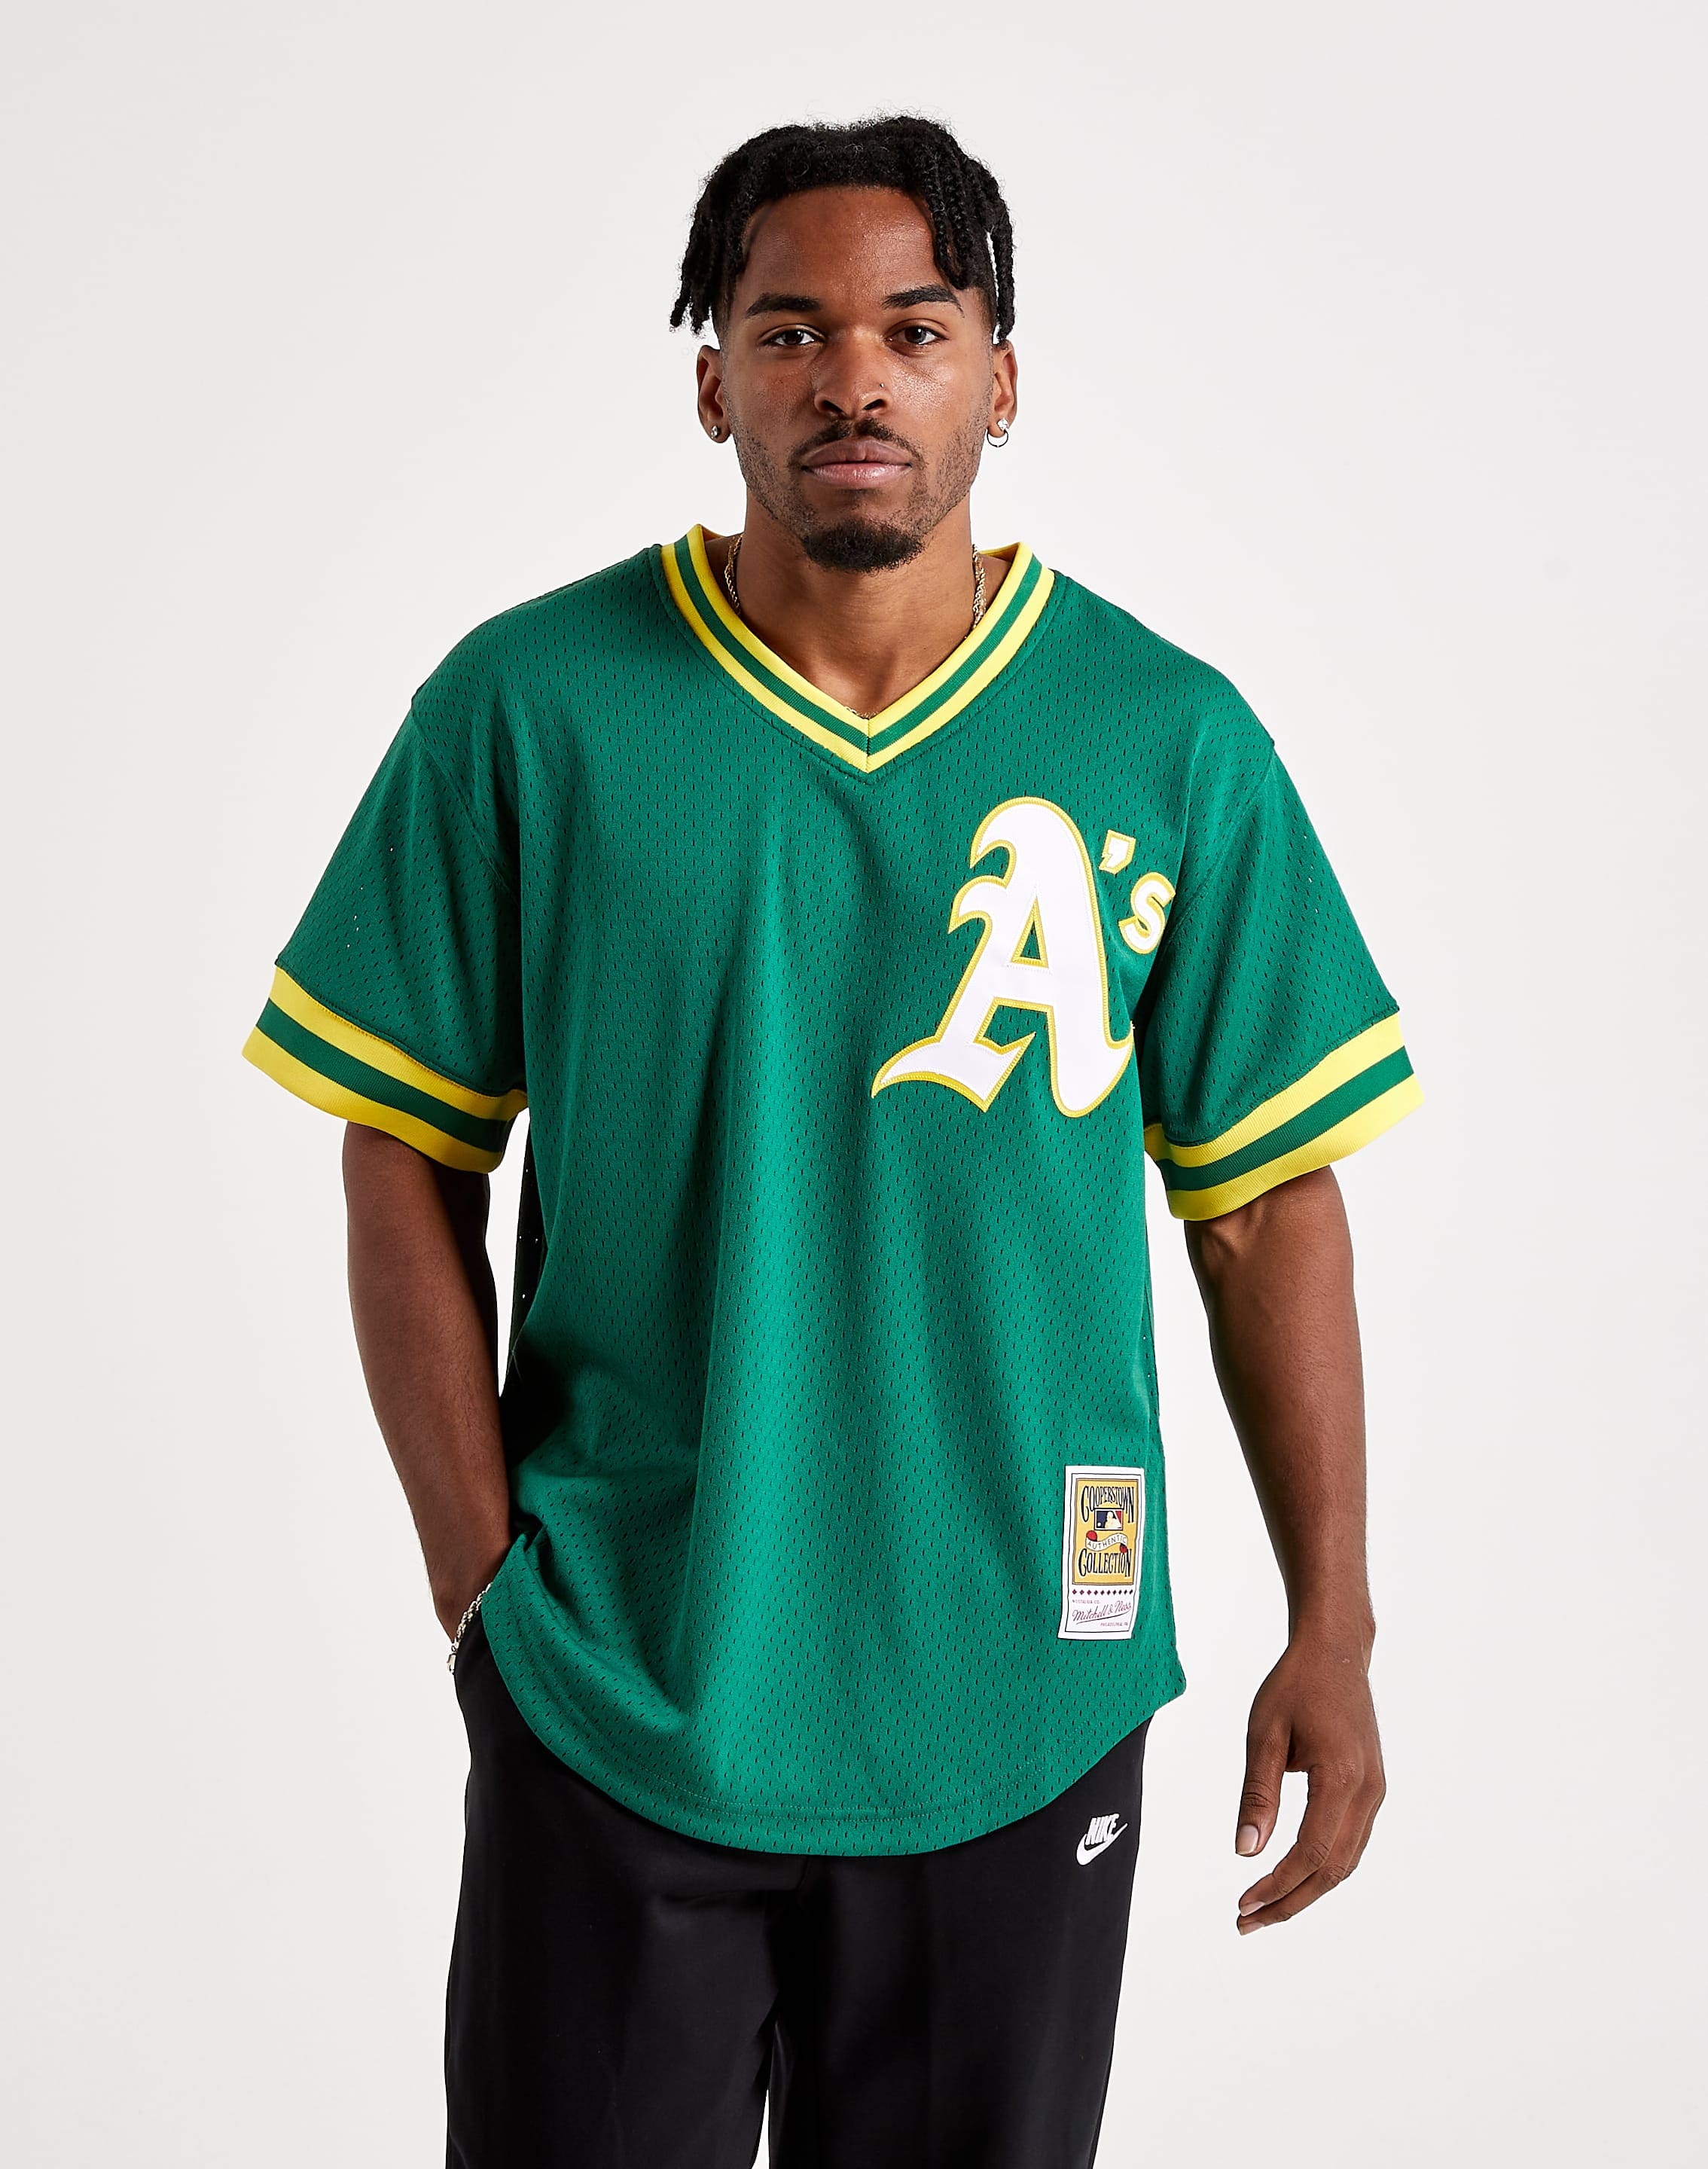 Rickey Henderson Oakland Athletics Gold Throwback Cooperstown Men's Jersey